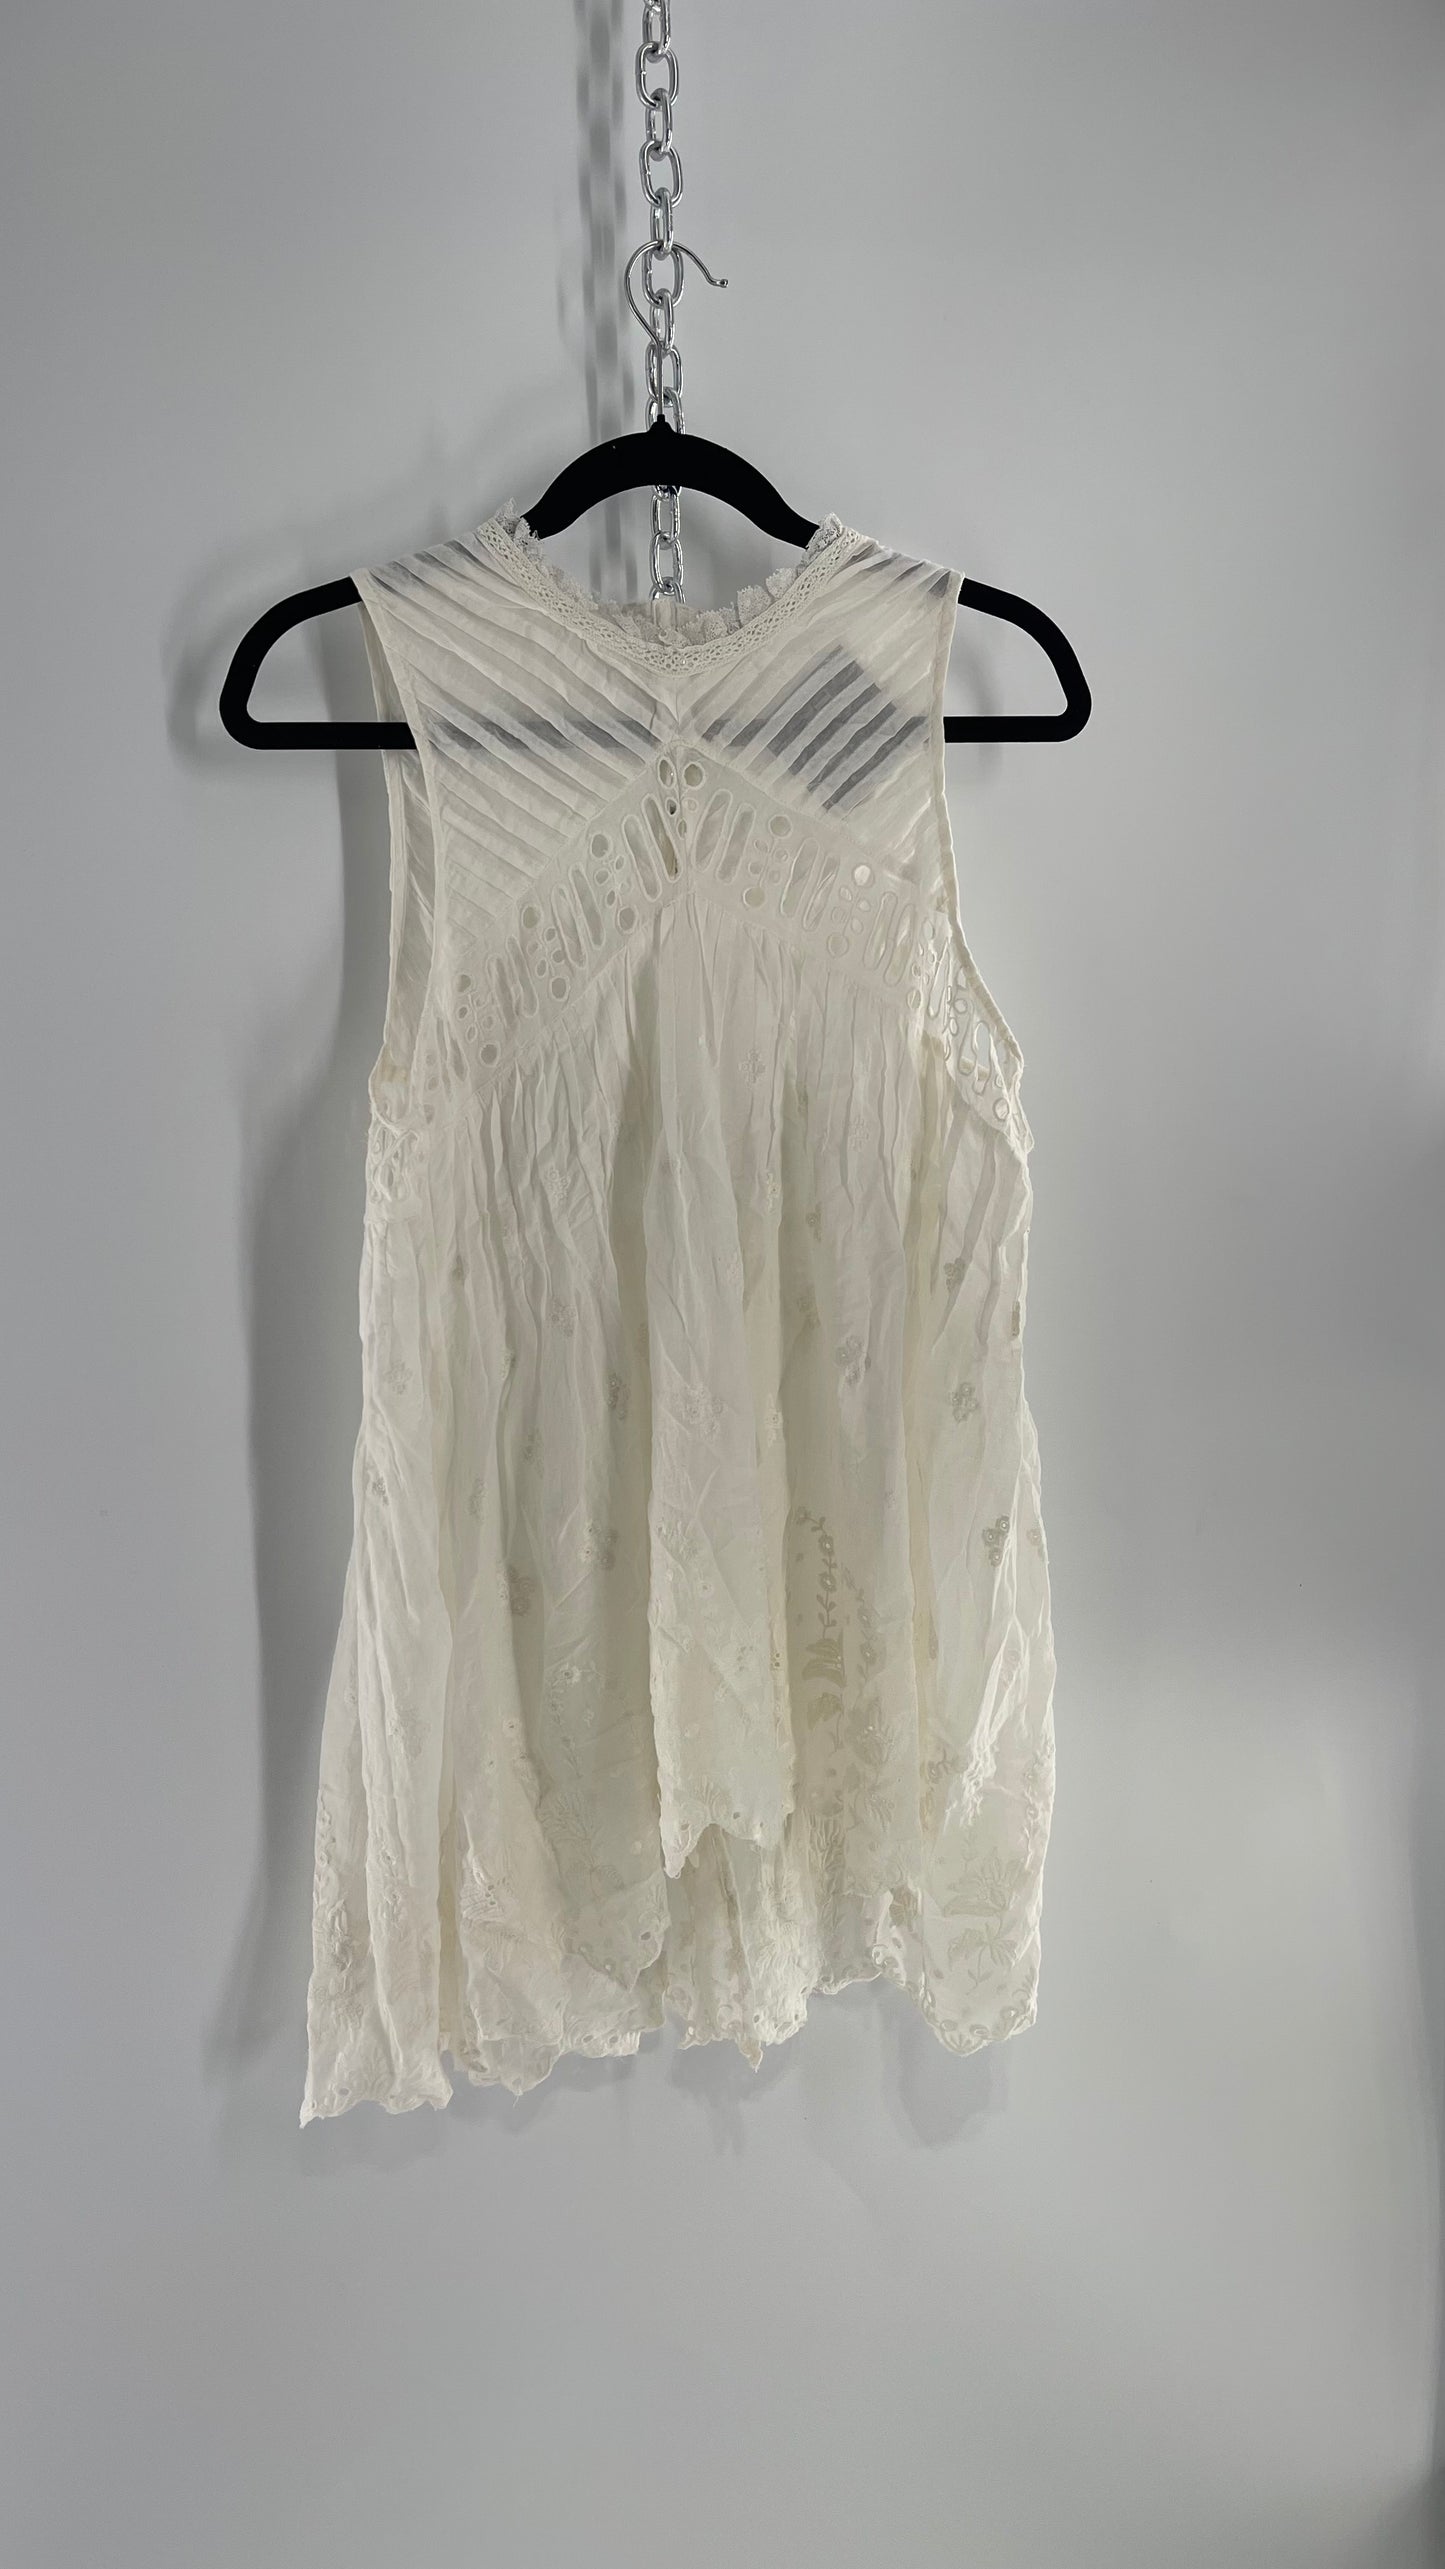 Free People White Cotton Eyelet Embroidered Lace Tank with Pleating, Buttoned and Slit Back (Small)